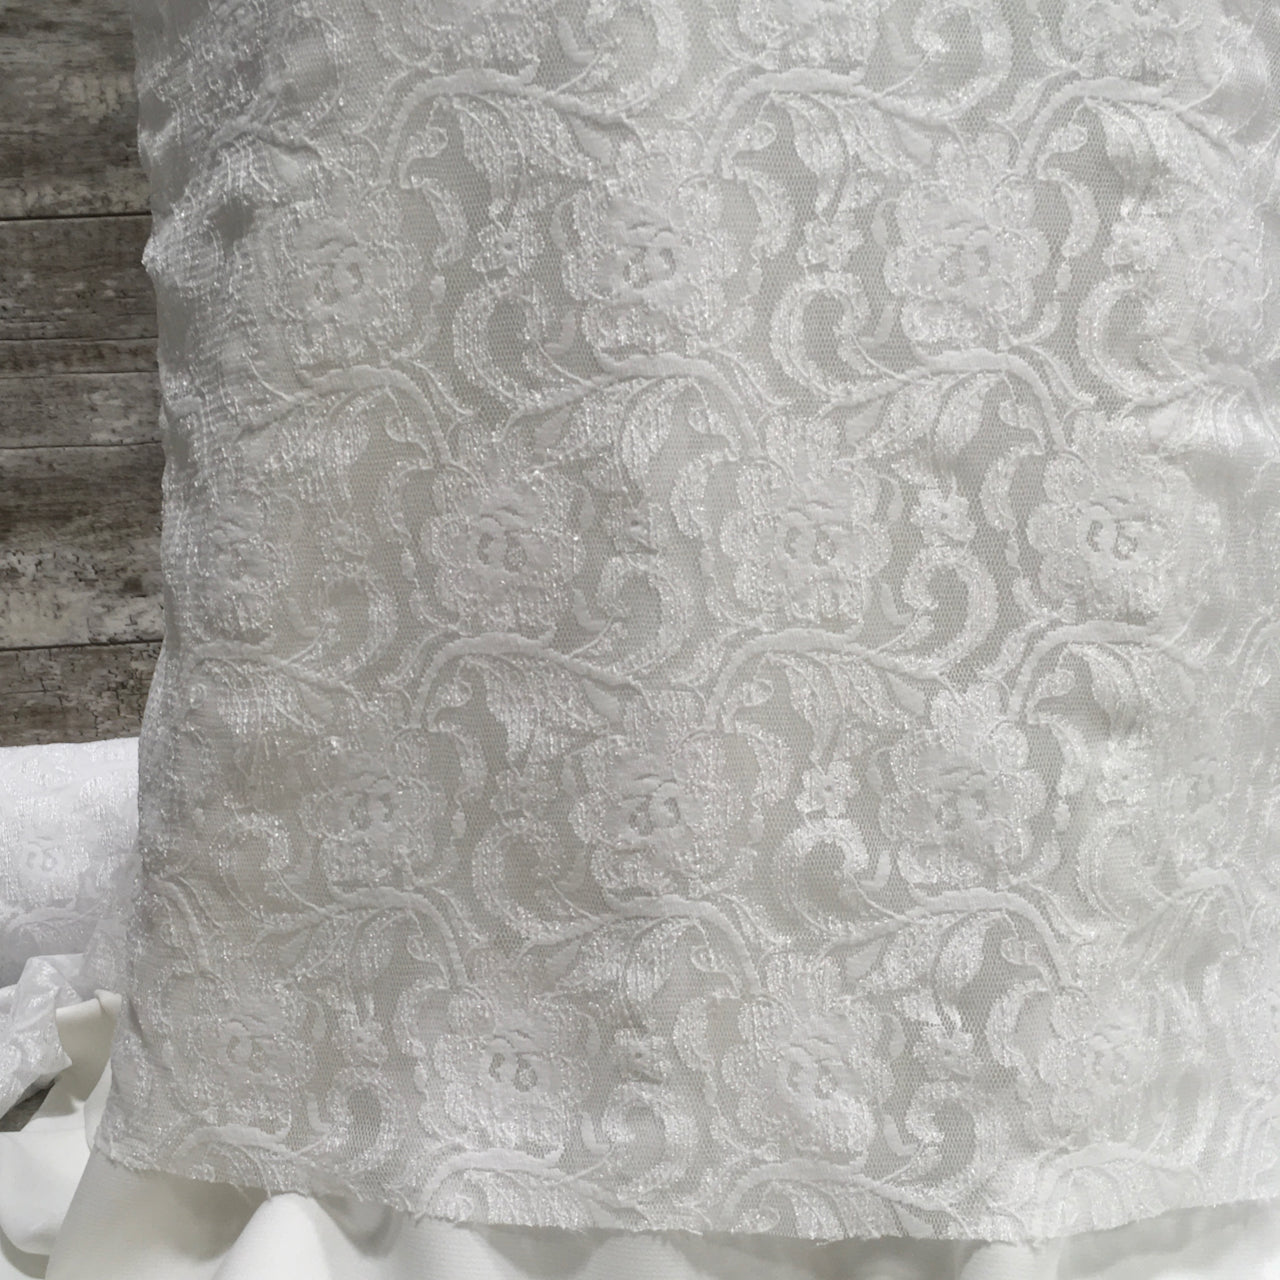 Bridal Lace Izzie  - Sold by the half yard